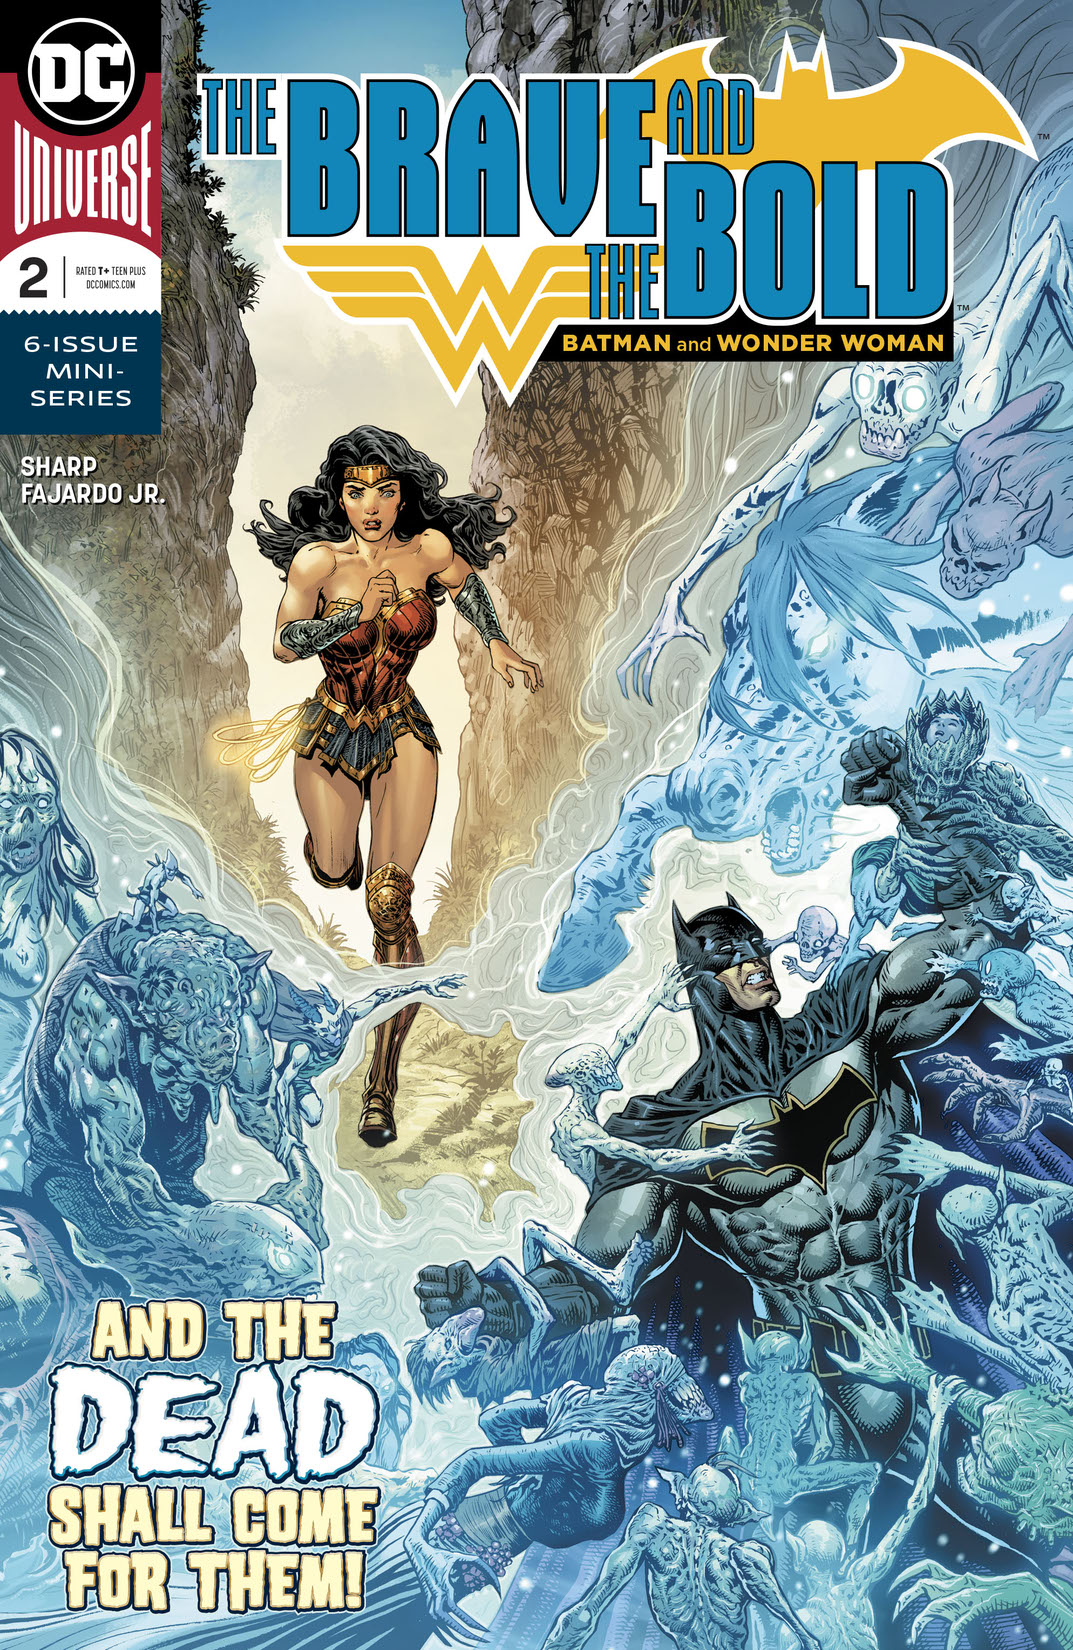 The Brave and the Bold: Batman and Wonder Woman #2 preview images